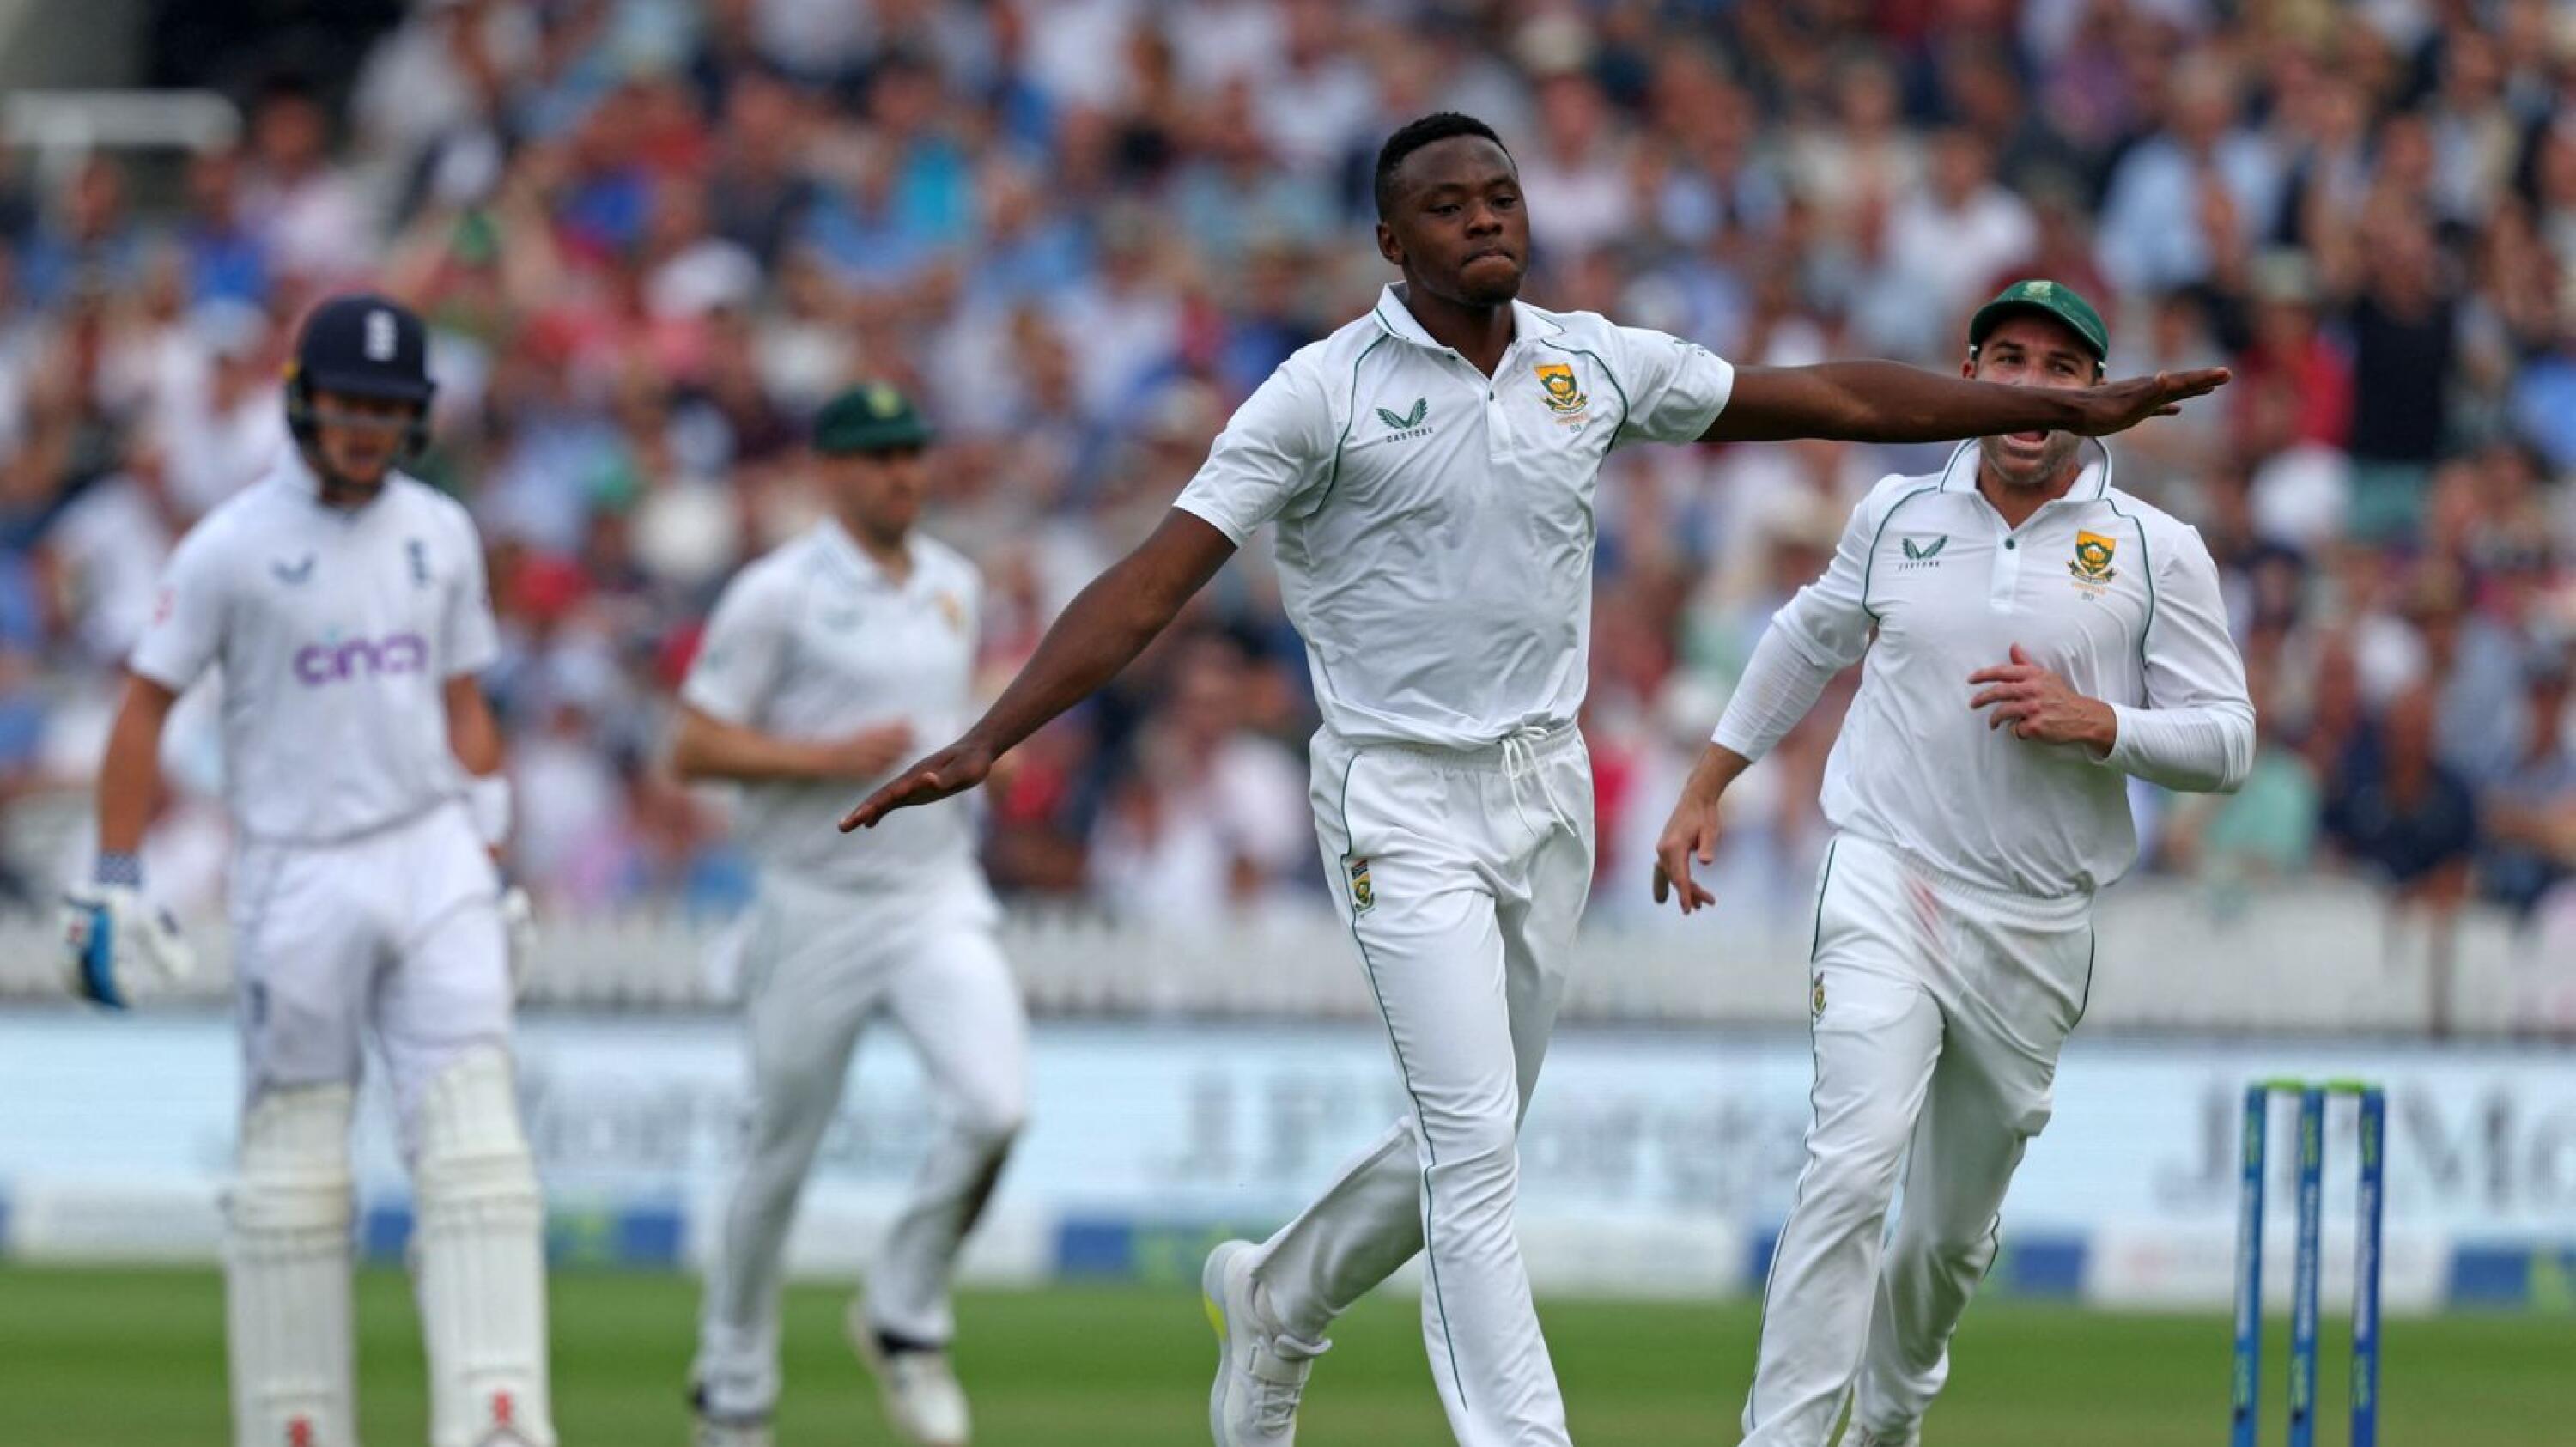 South Africa's Kagiso Rabada celebrates after taking the wicket of England's Zak Crawley during play on the opening day of the first Test match at Lord's Cricket Ground in London on Wednesday